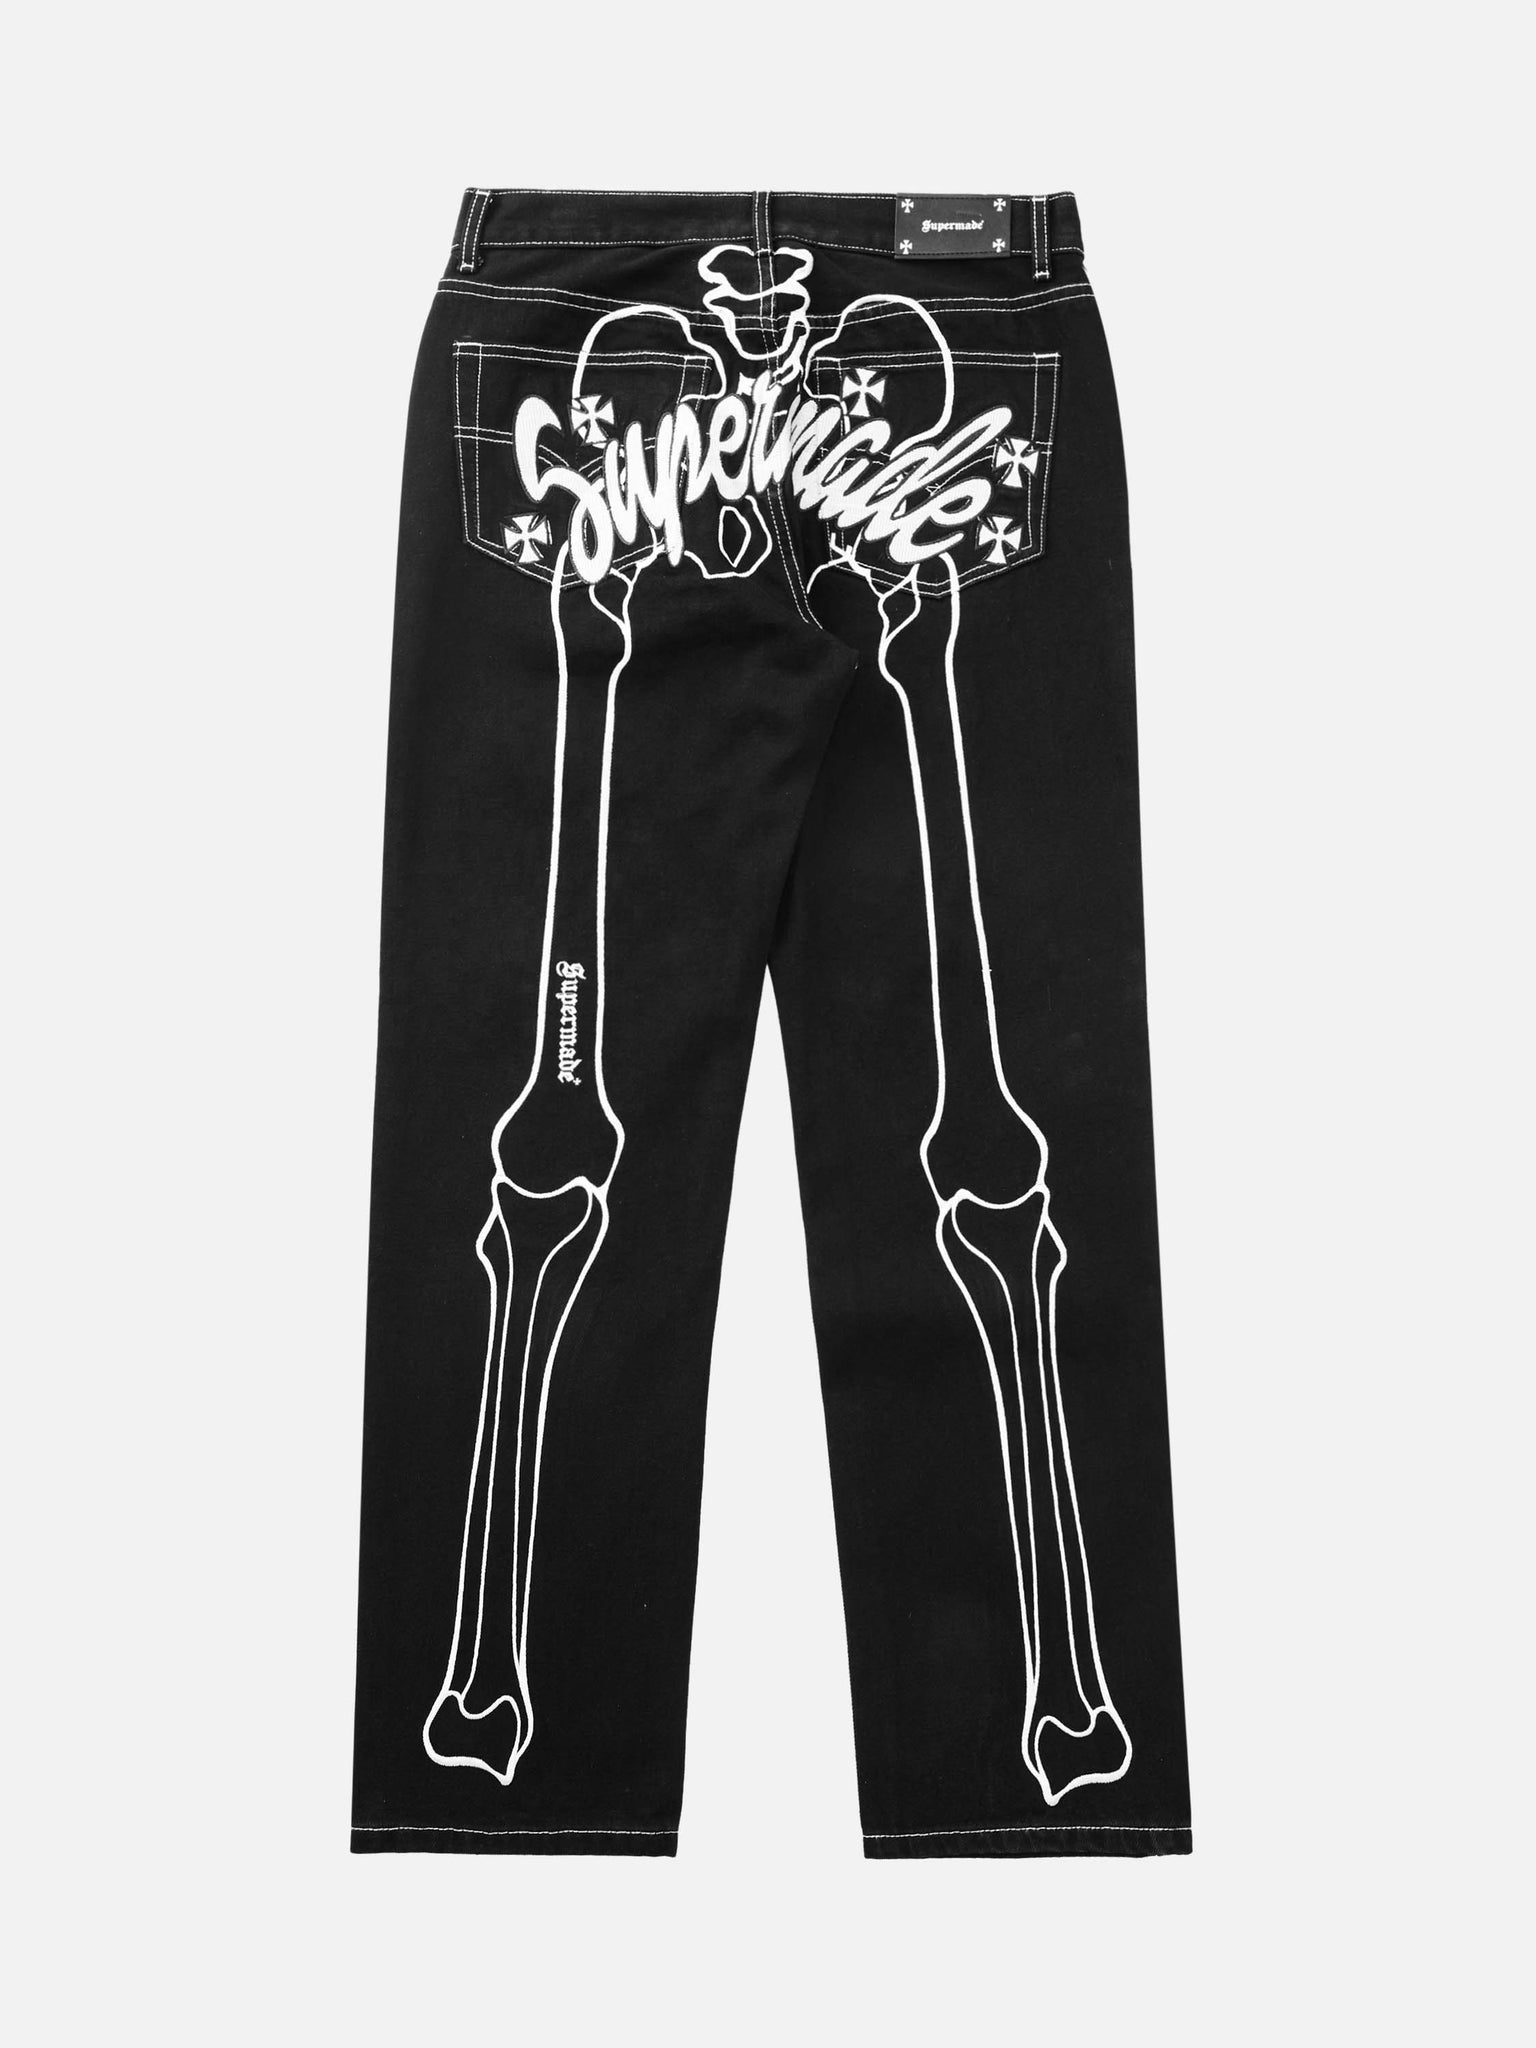 Thesupermade Hip Hop Bones Embroidered Jeans